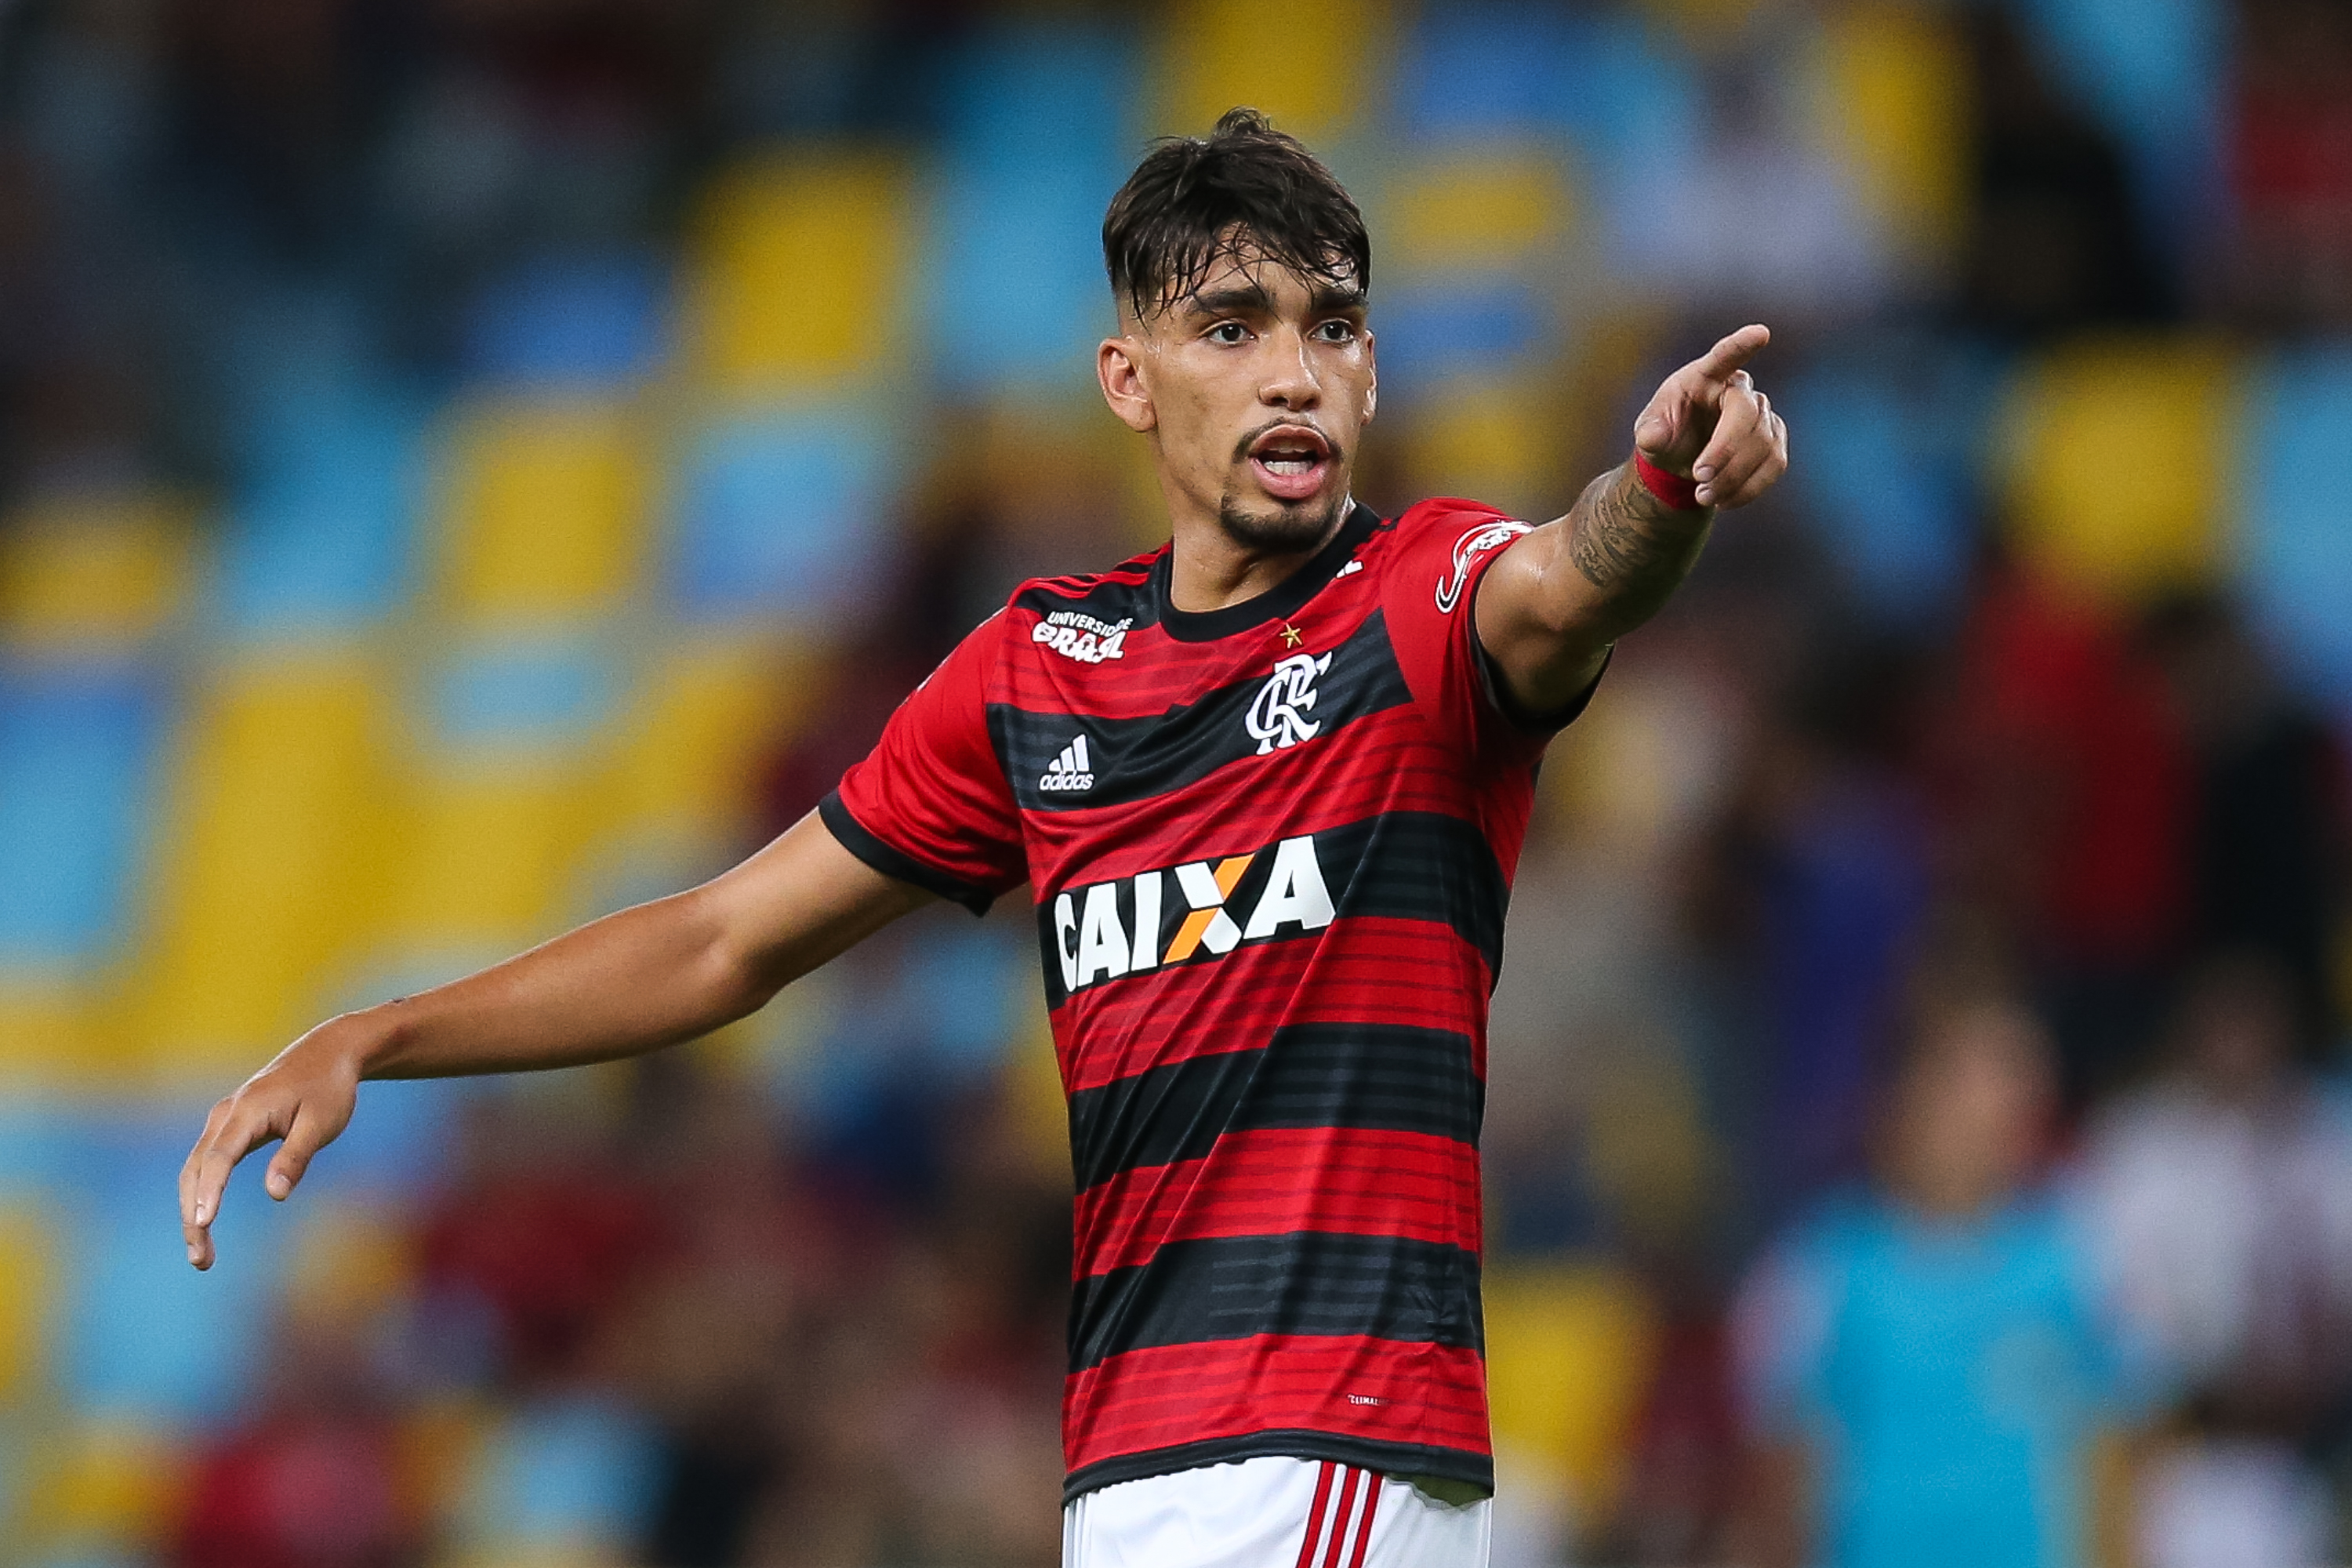 RIO DE JANEIRO, BRAZIL - JULY 21: Lucas Paqueta of Flamengo gestures during a match between Flamengo and Botafogo as part of Brasileirao Series A 2018 at Maracana Stadium on July 21, 2018 in Rio de Janeiro, Brazil. (Photo by Buda Mendes/Getty Images)